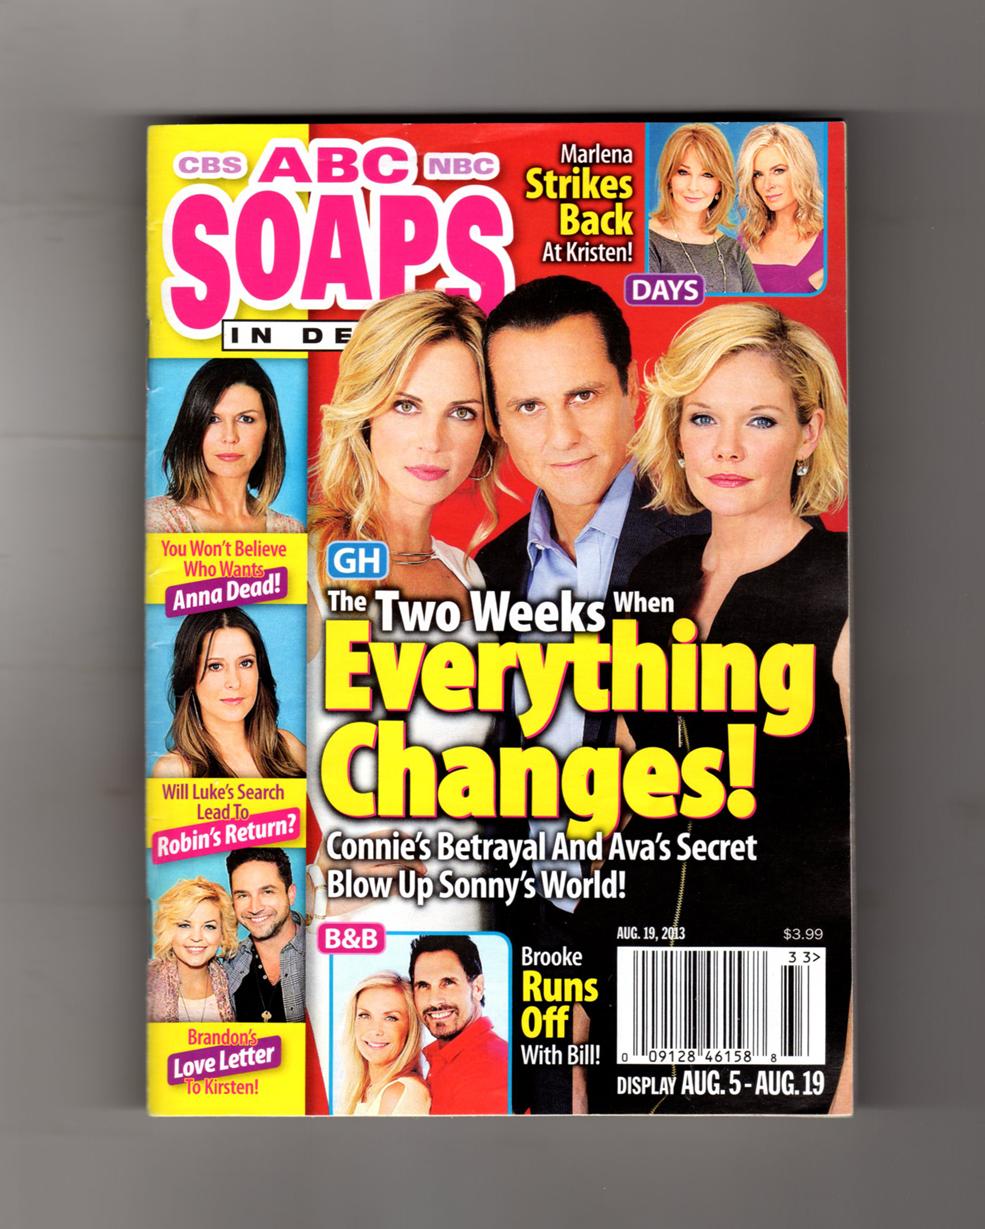 ABC Soaps in Depth - August 19, 2013. General Hospital, The Young and the  Restless, The Bold & the Beautiful, Days of Our Lives, Kirsten Storms,  Brandon Barash, Bergen Williams, Brianna Brown,